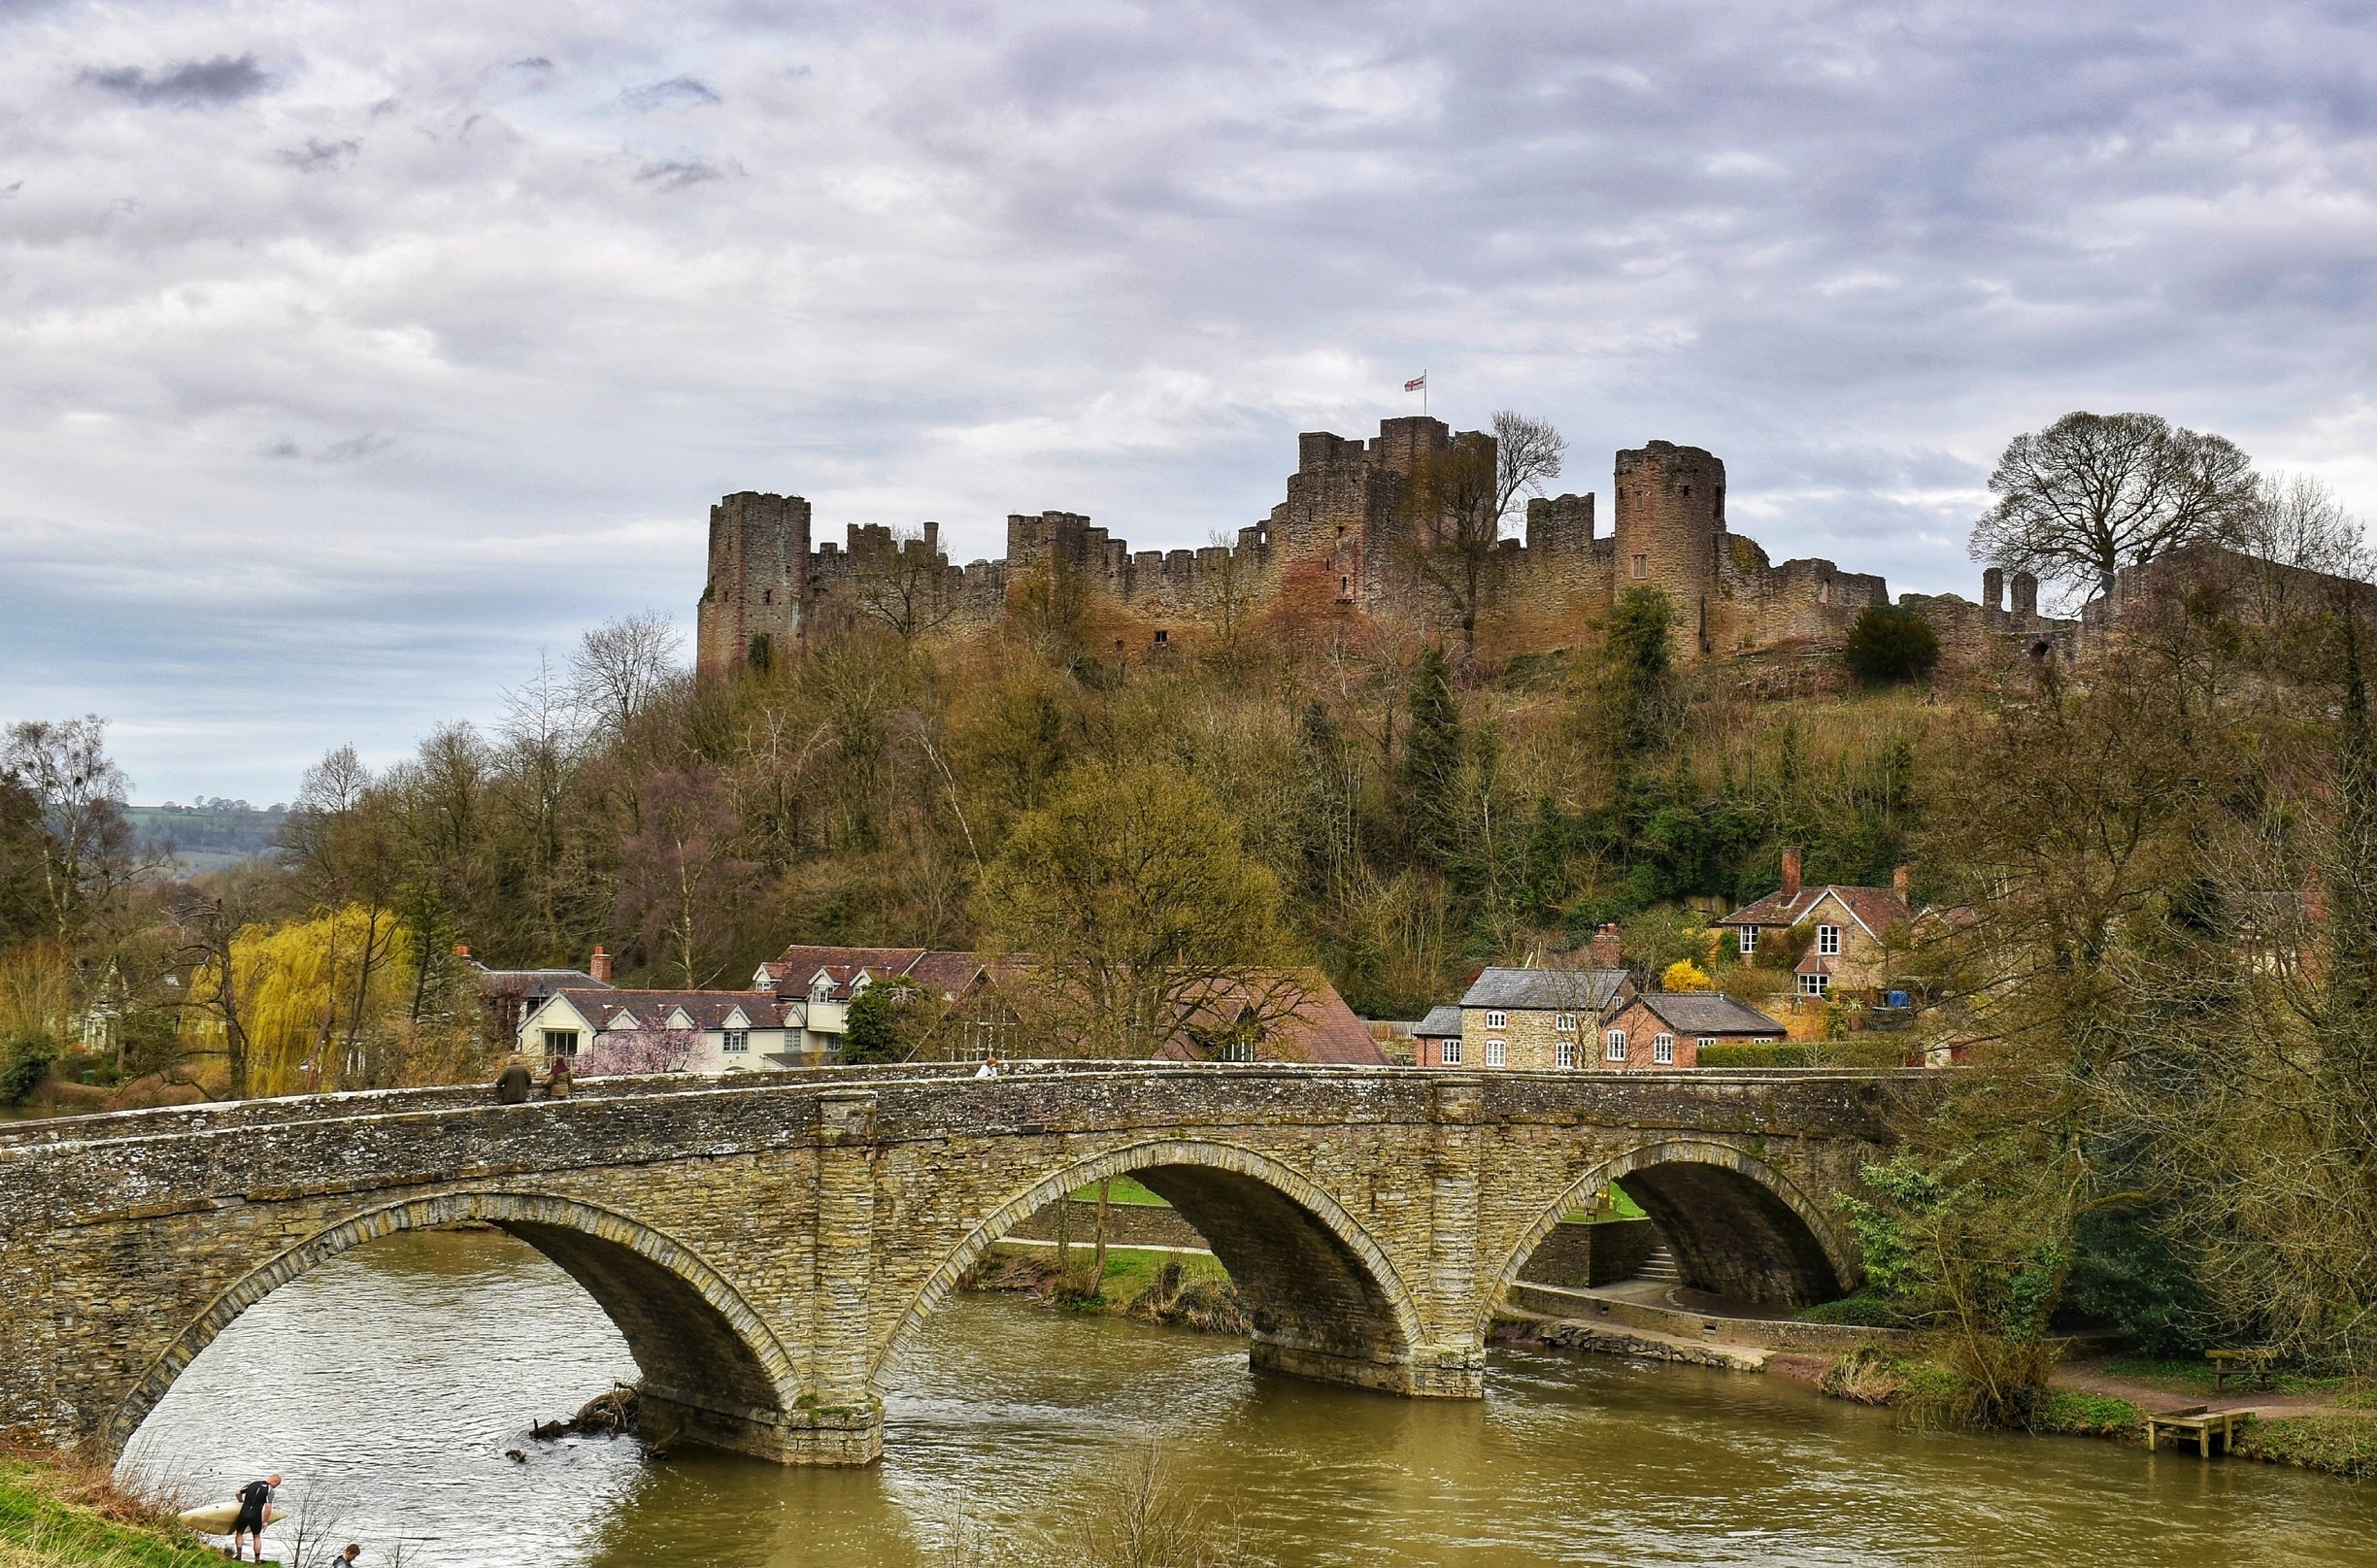 Visit Ludlow: 2023 Travel Guide for Ludlow, England | Expedia